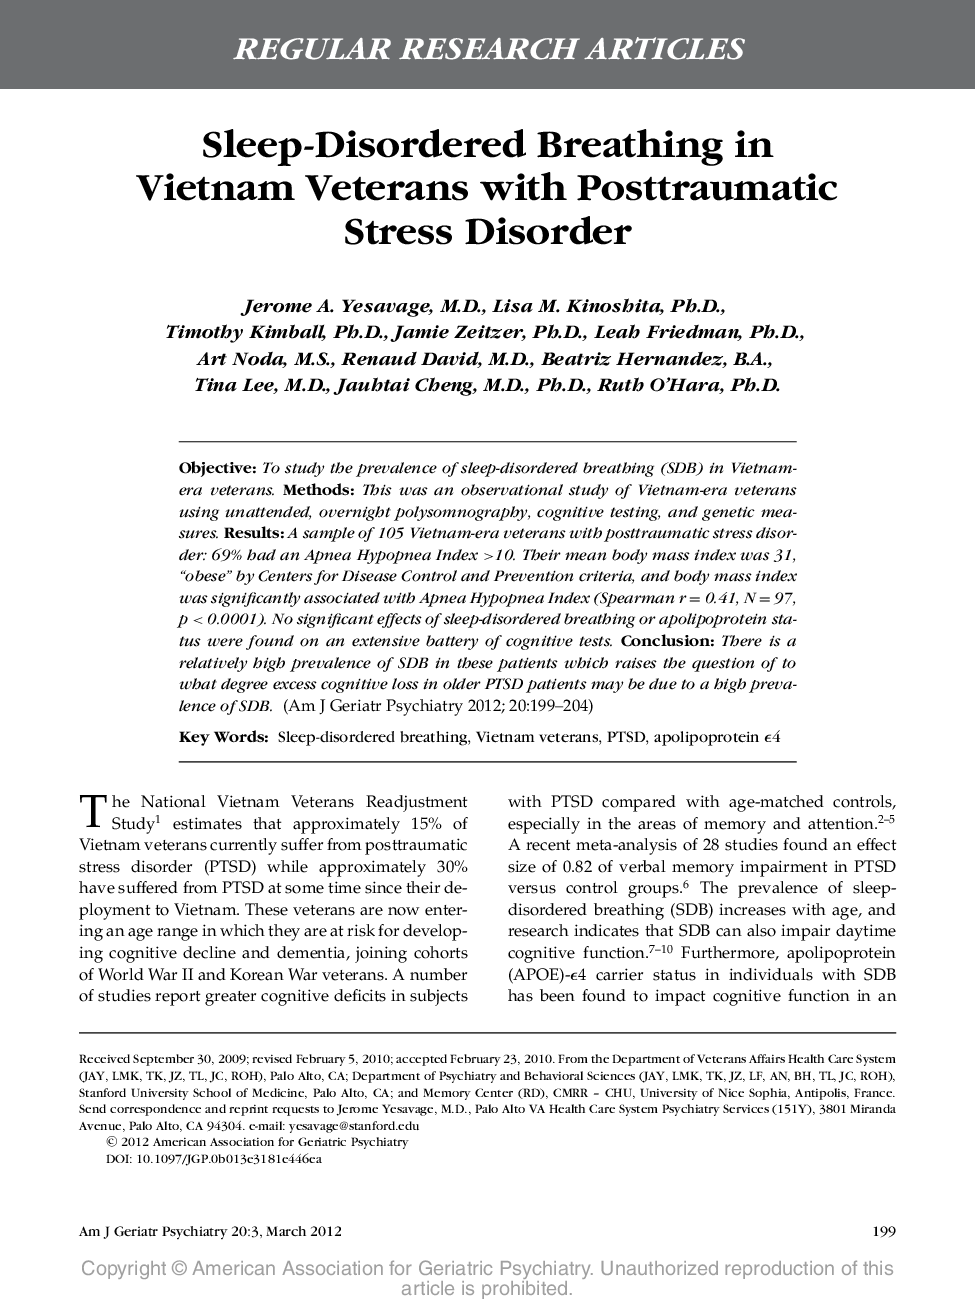 Sleep-Disordered Breathing in Vietnam Veterans with Posttraumatic Stress Disorder